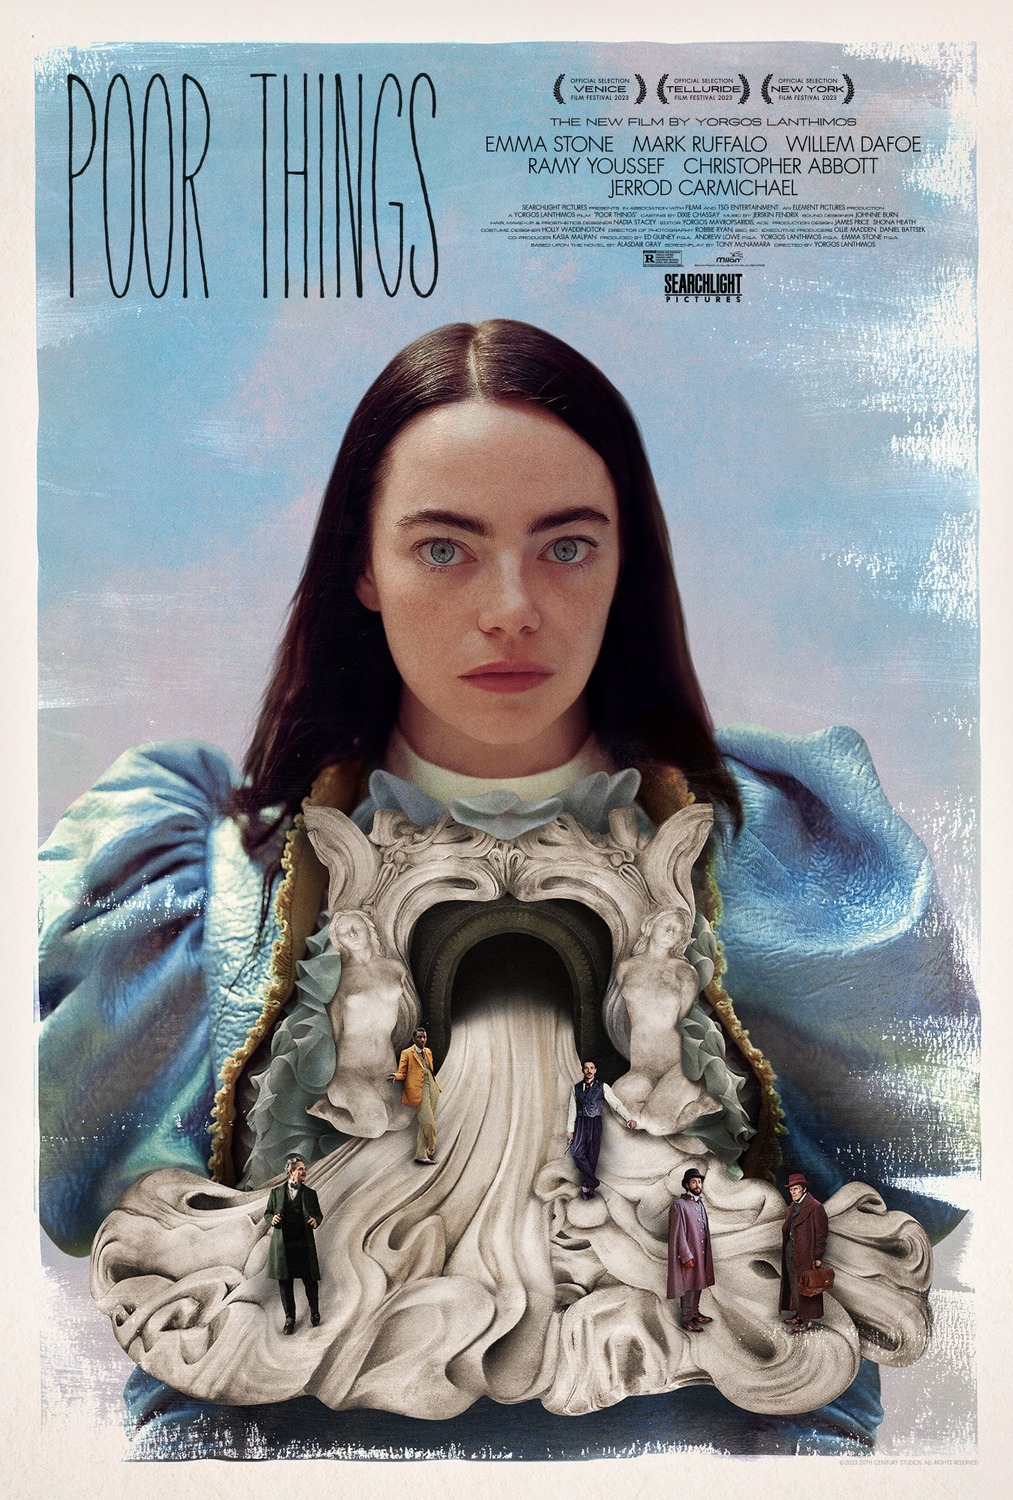 Emma Stone Leads! “Poor Things” Review: Sci-Fi Meets Feminist Fantasy!